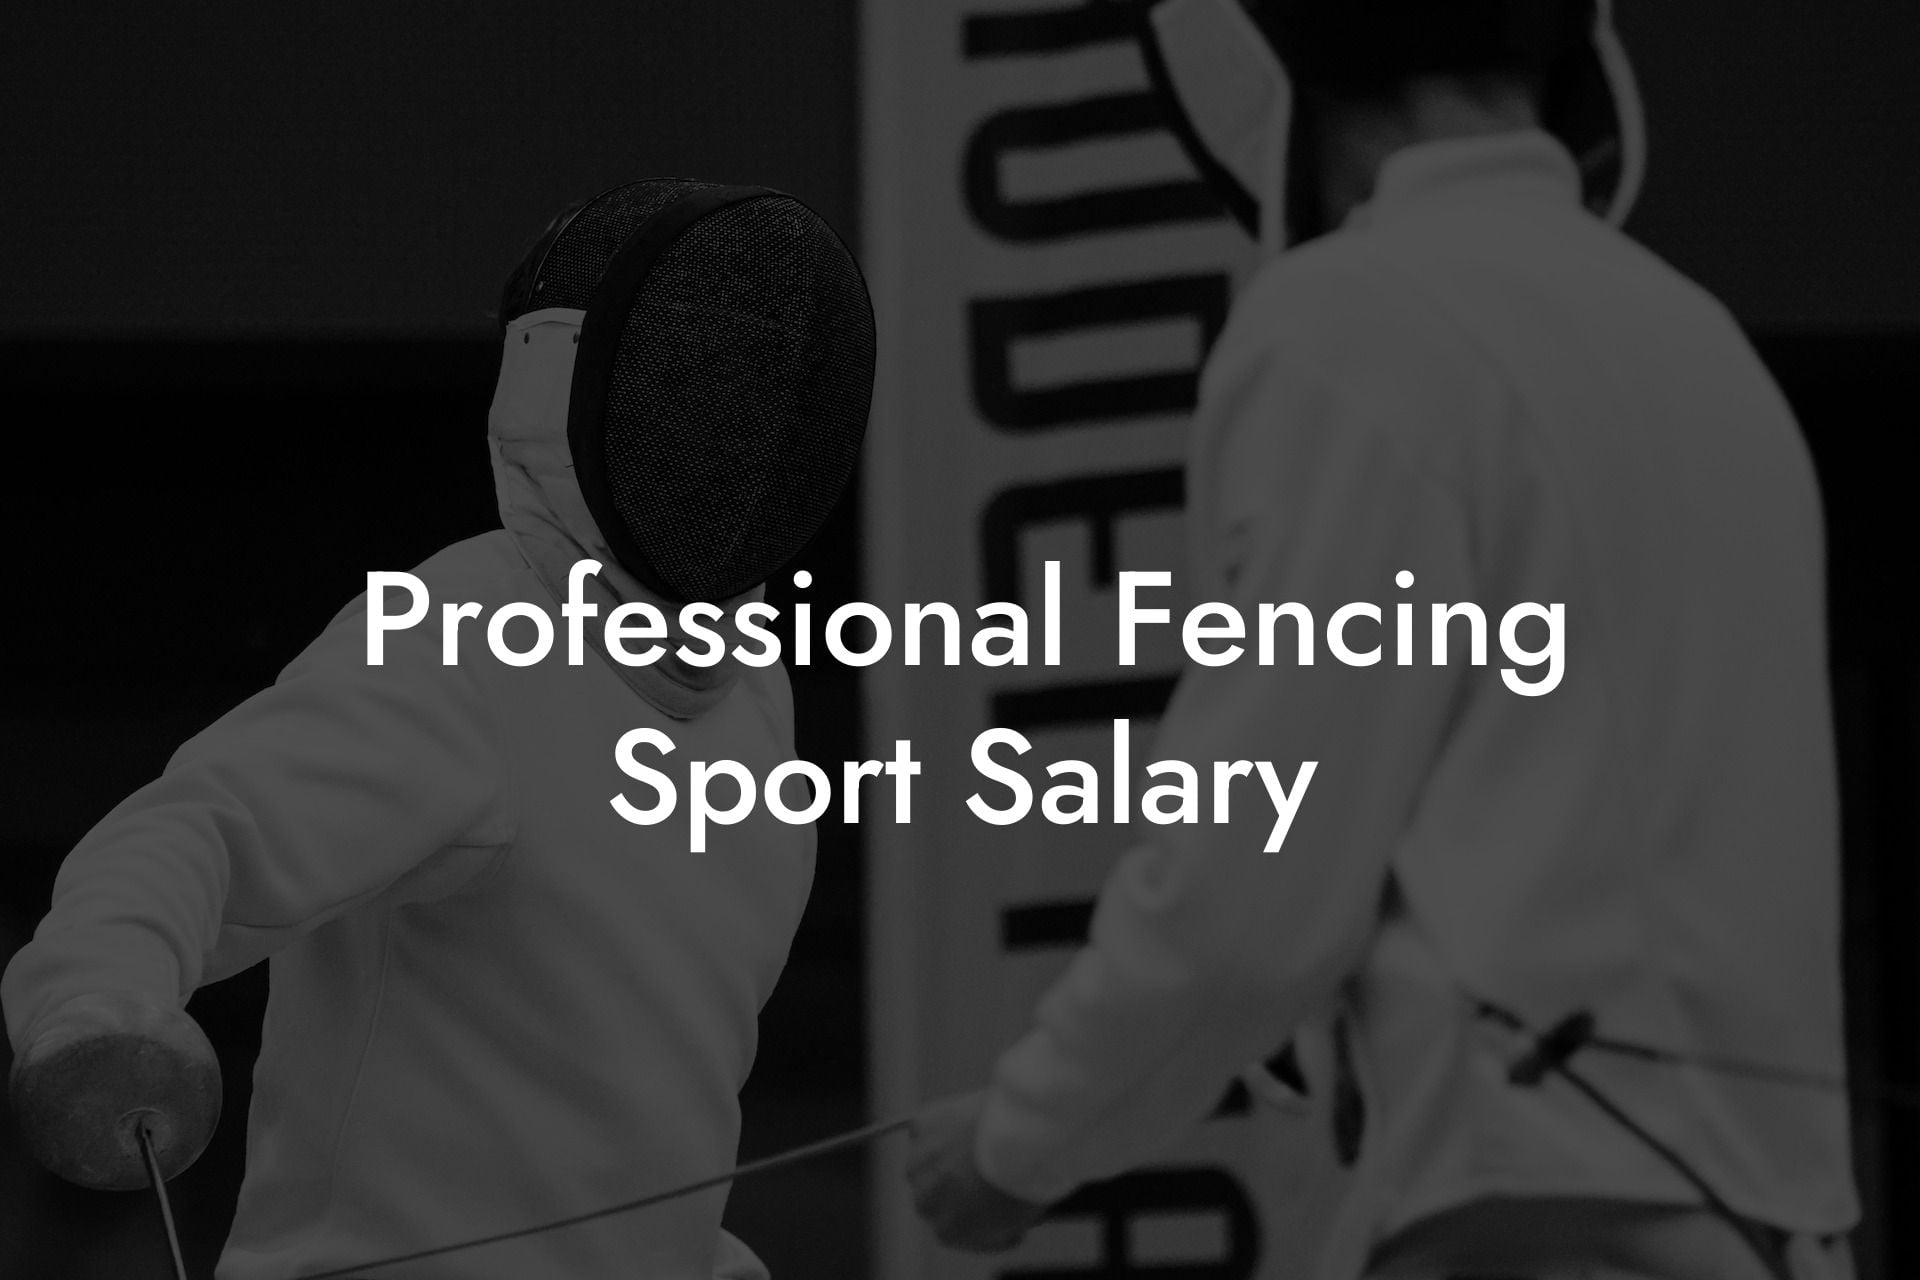 Professional Fencing Sport Salary